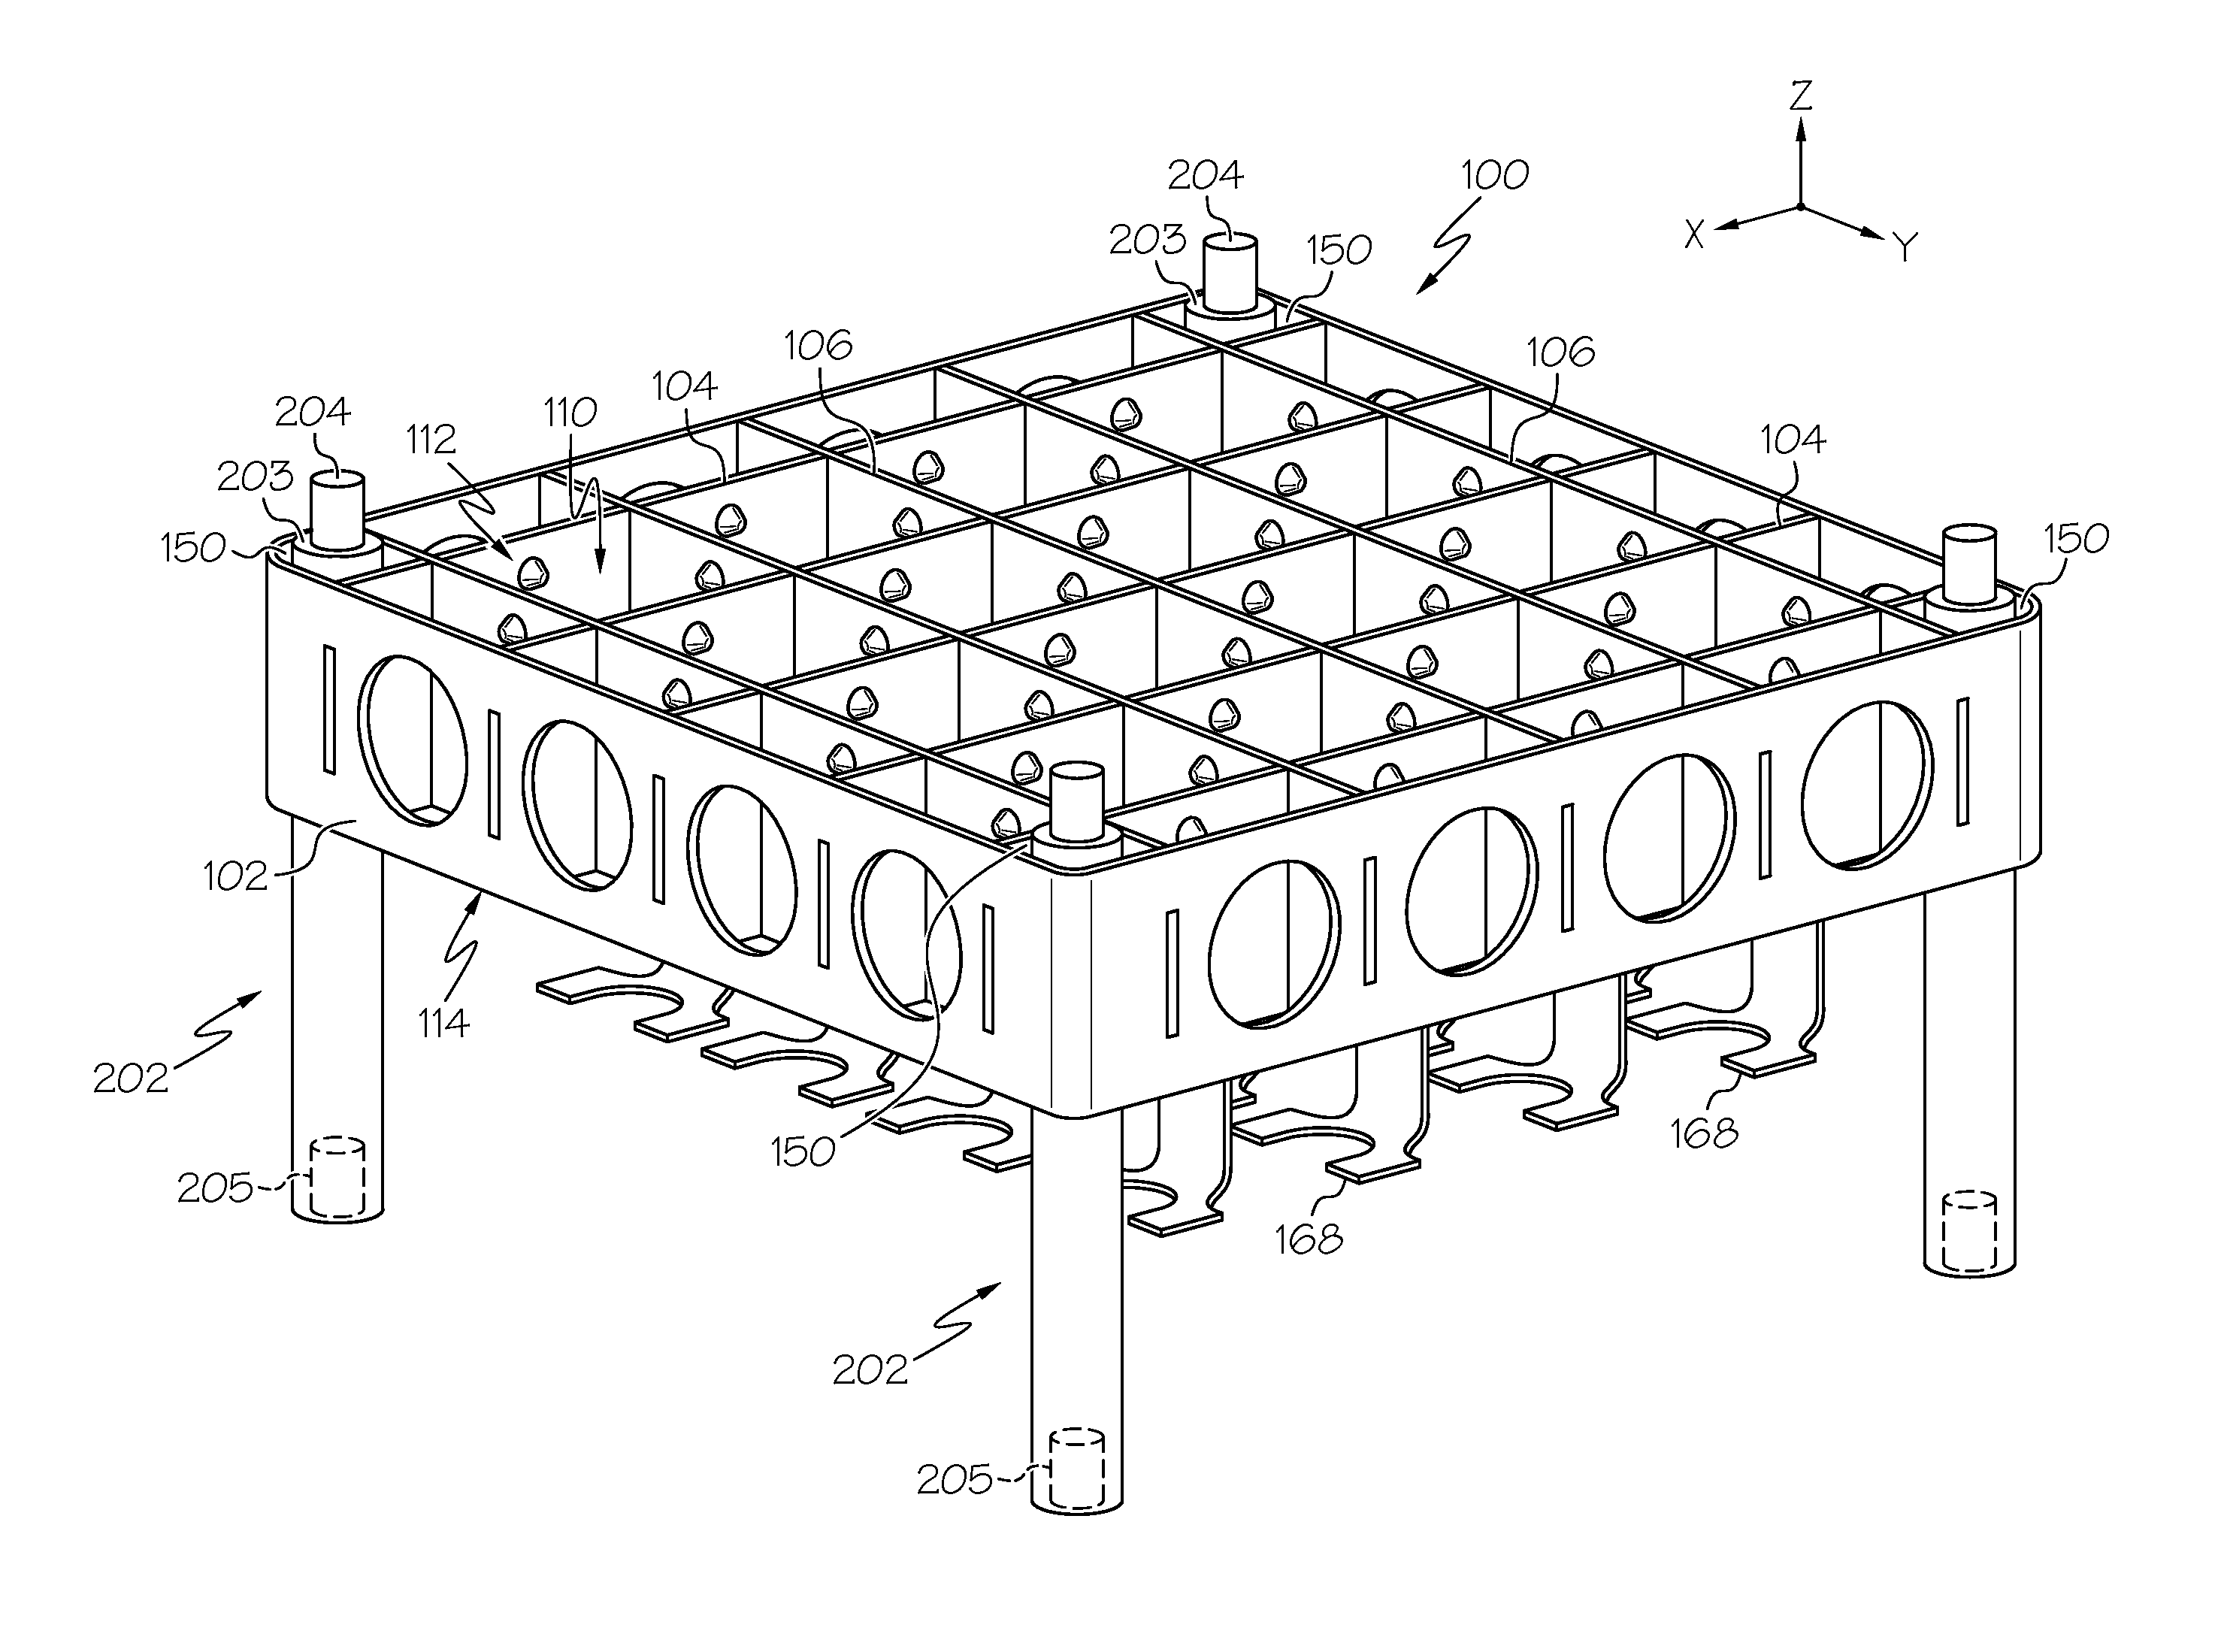 Magazine apparatuses for holding glass articles during processing